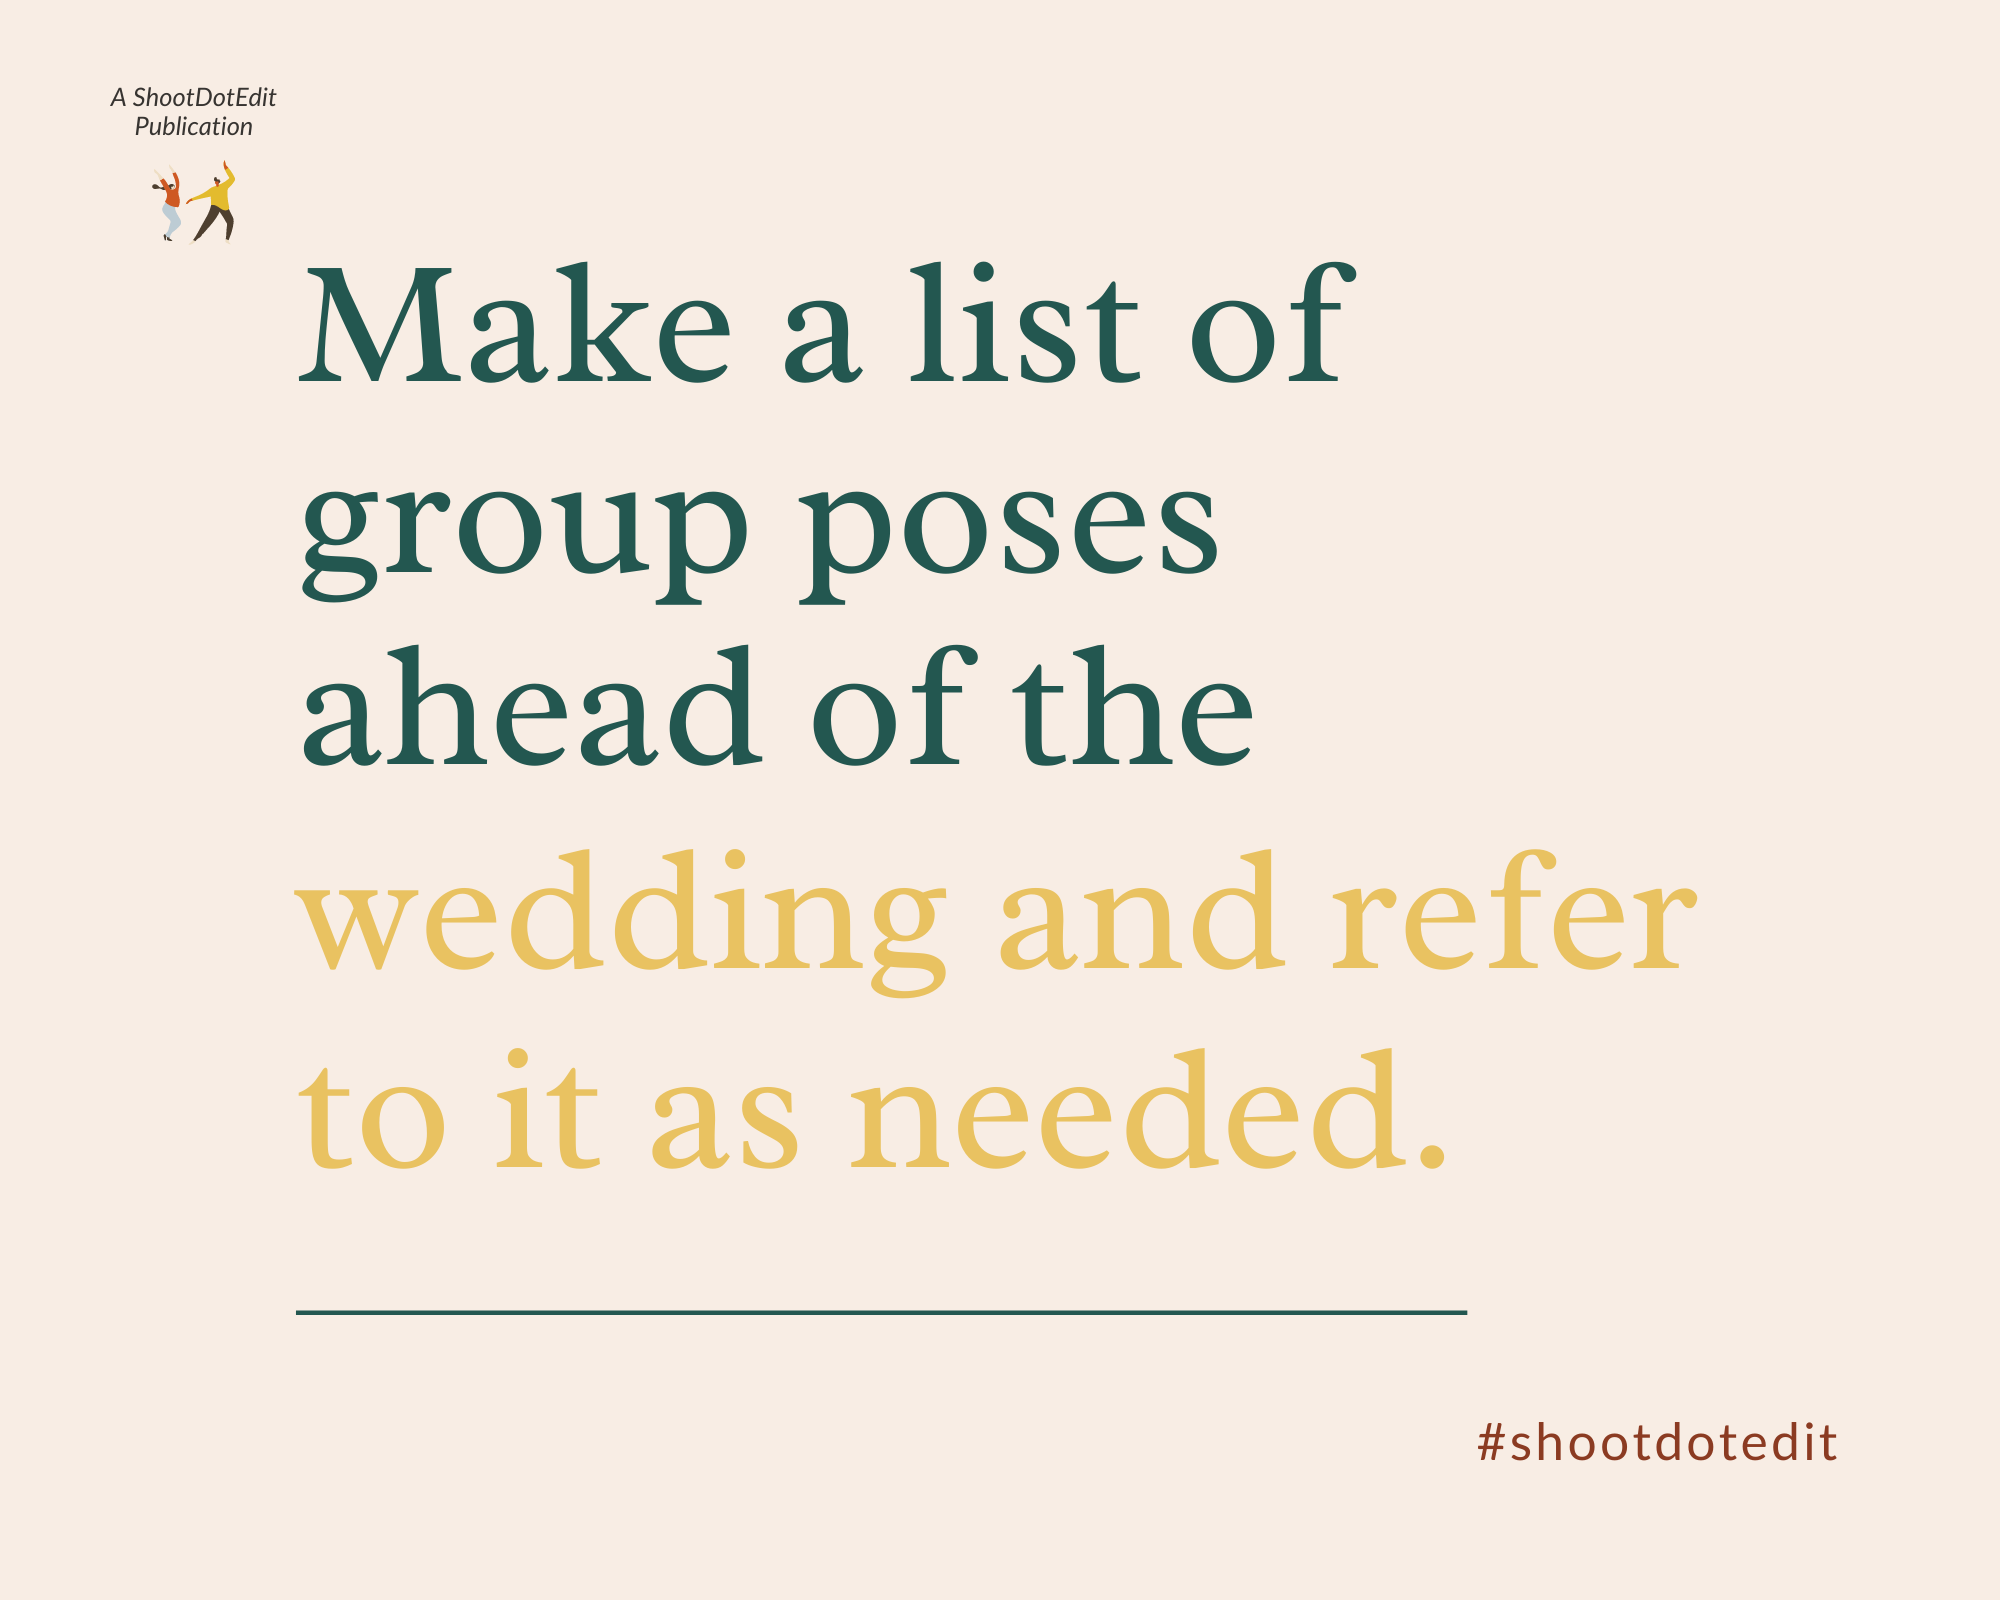 Infographic stating make a list of wedding group poses ahead of the wedding and refer to it as needed